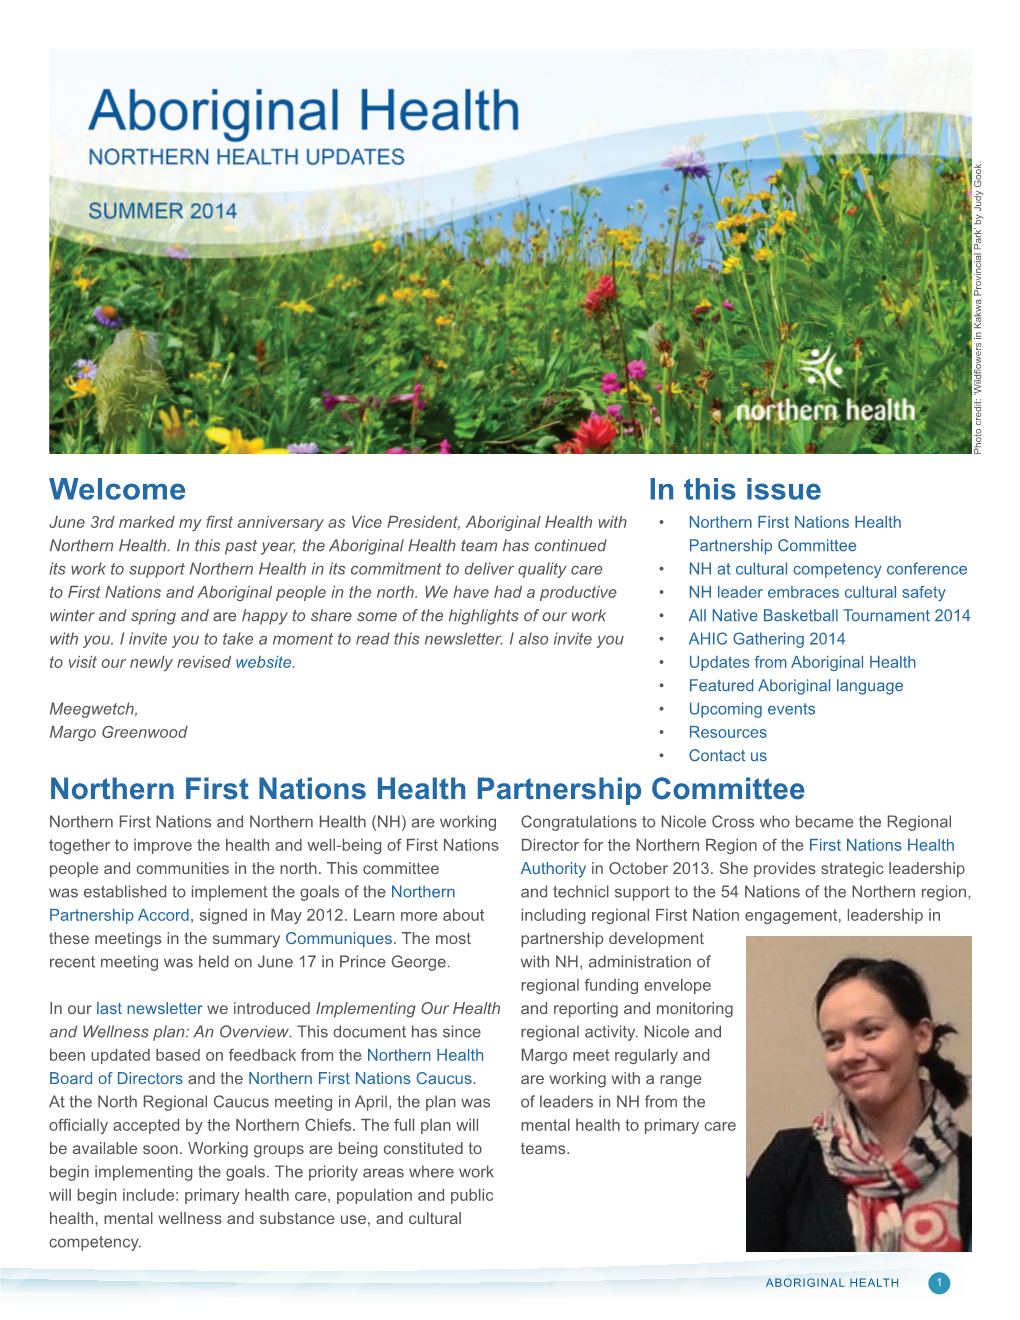 Northern First Nations Health Partnership Committee in This Issue